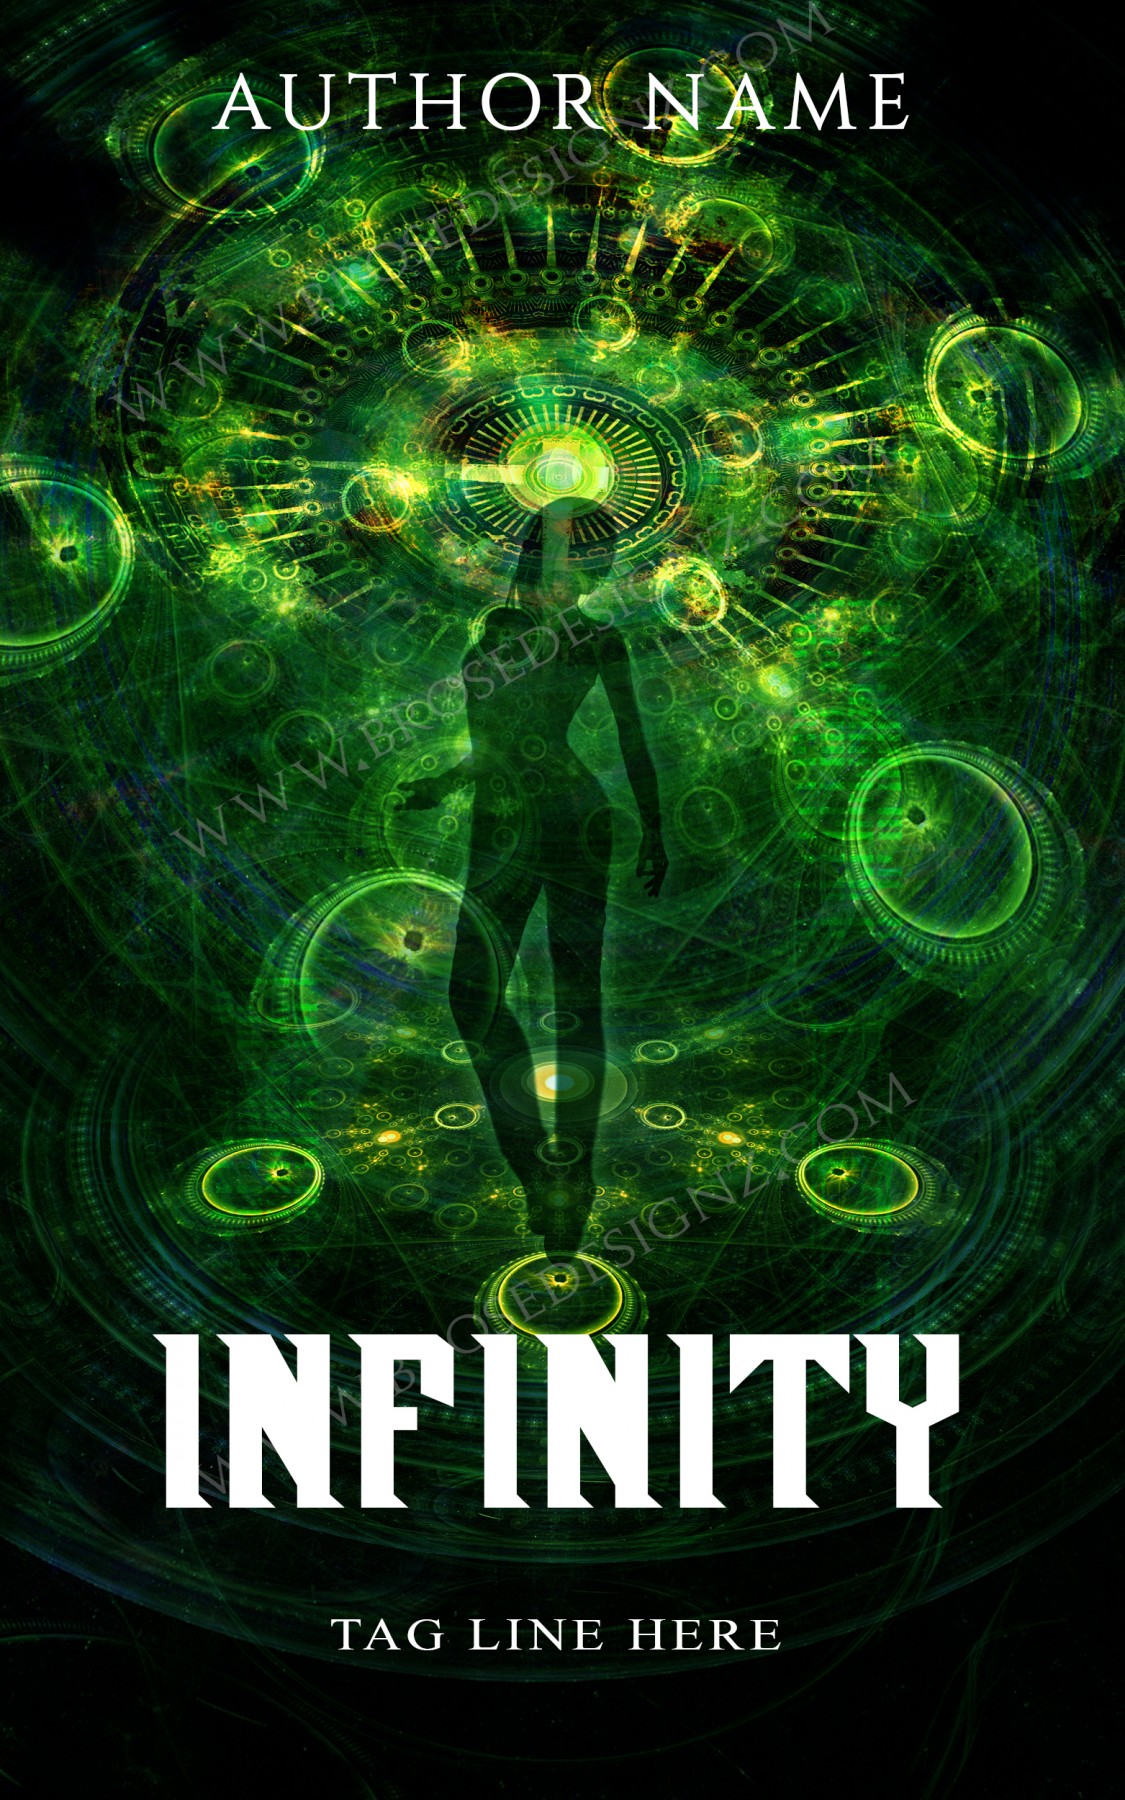 Infinity - The Book Cover Designer